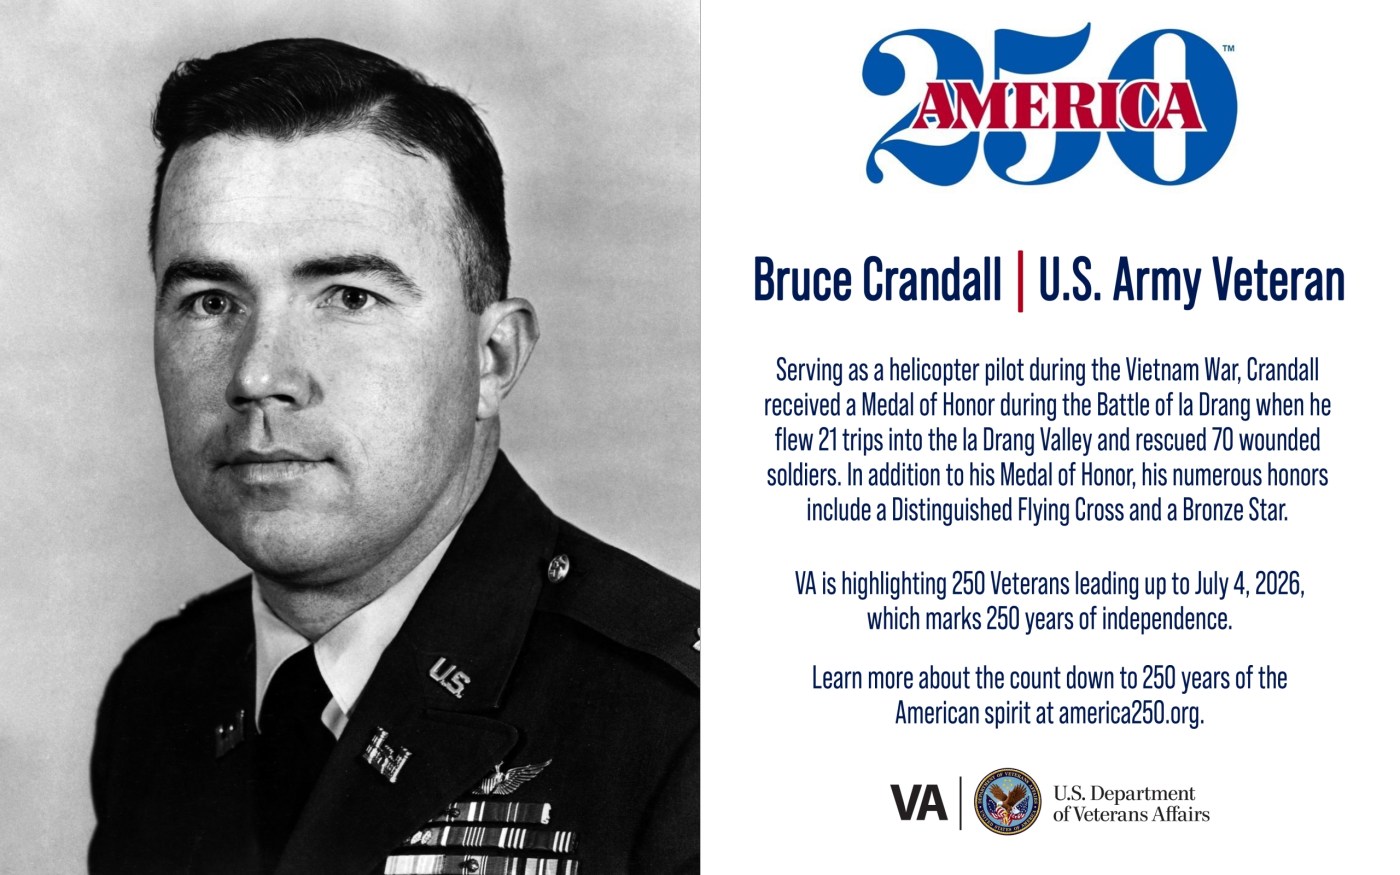 This week’s America250 salute is Army Veteran Bruce Crandall, who a helicopter pilot who rescued 70 wounded soldiers during the Battle of Ia Drang in Vietnam.